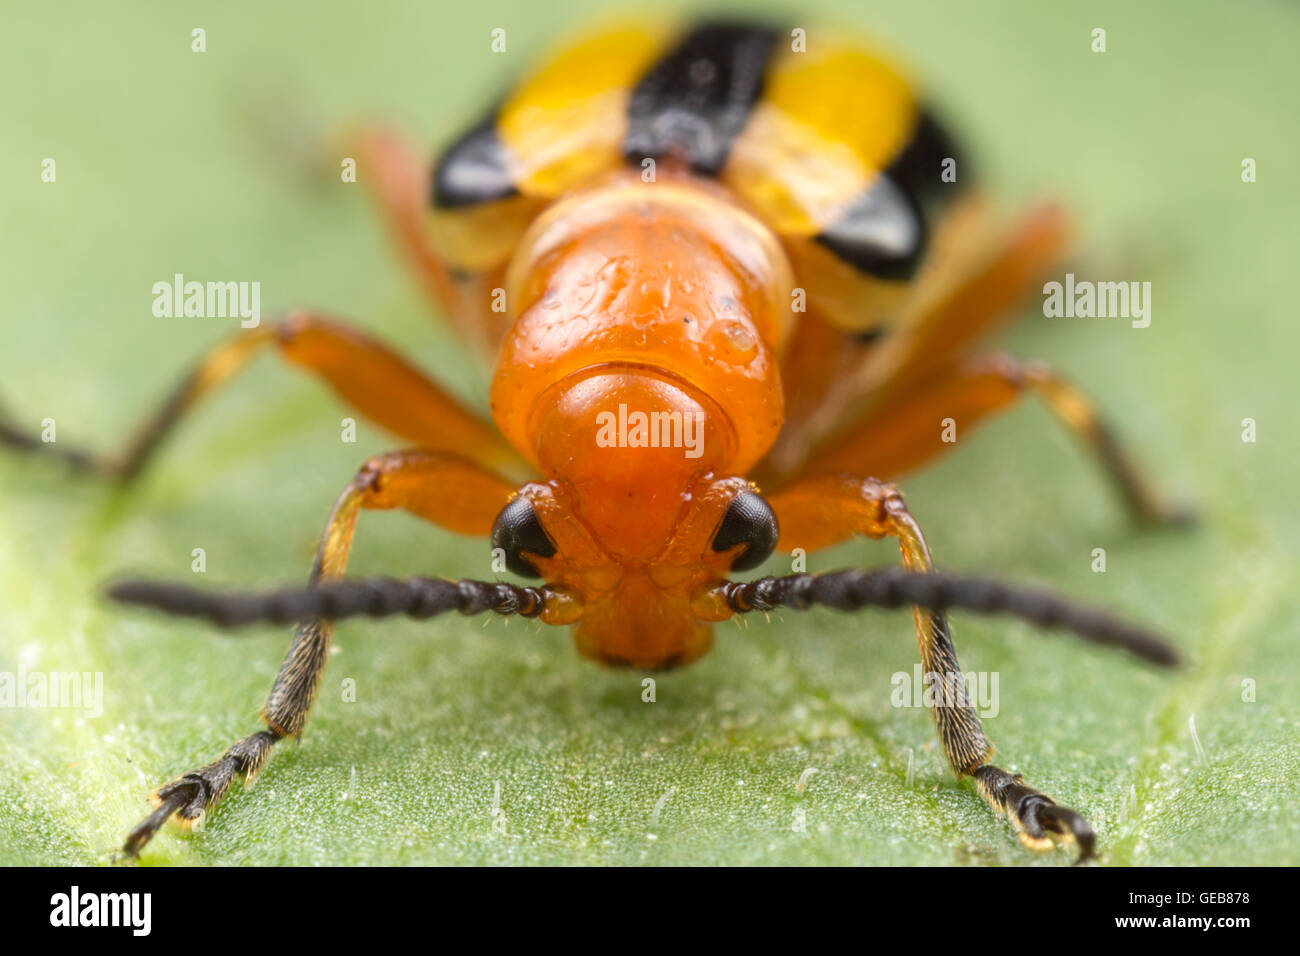 A frontal view of a Three-lined Potato Beetle (Lema daturaphila) on a leaf. Stock Photo